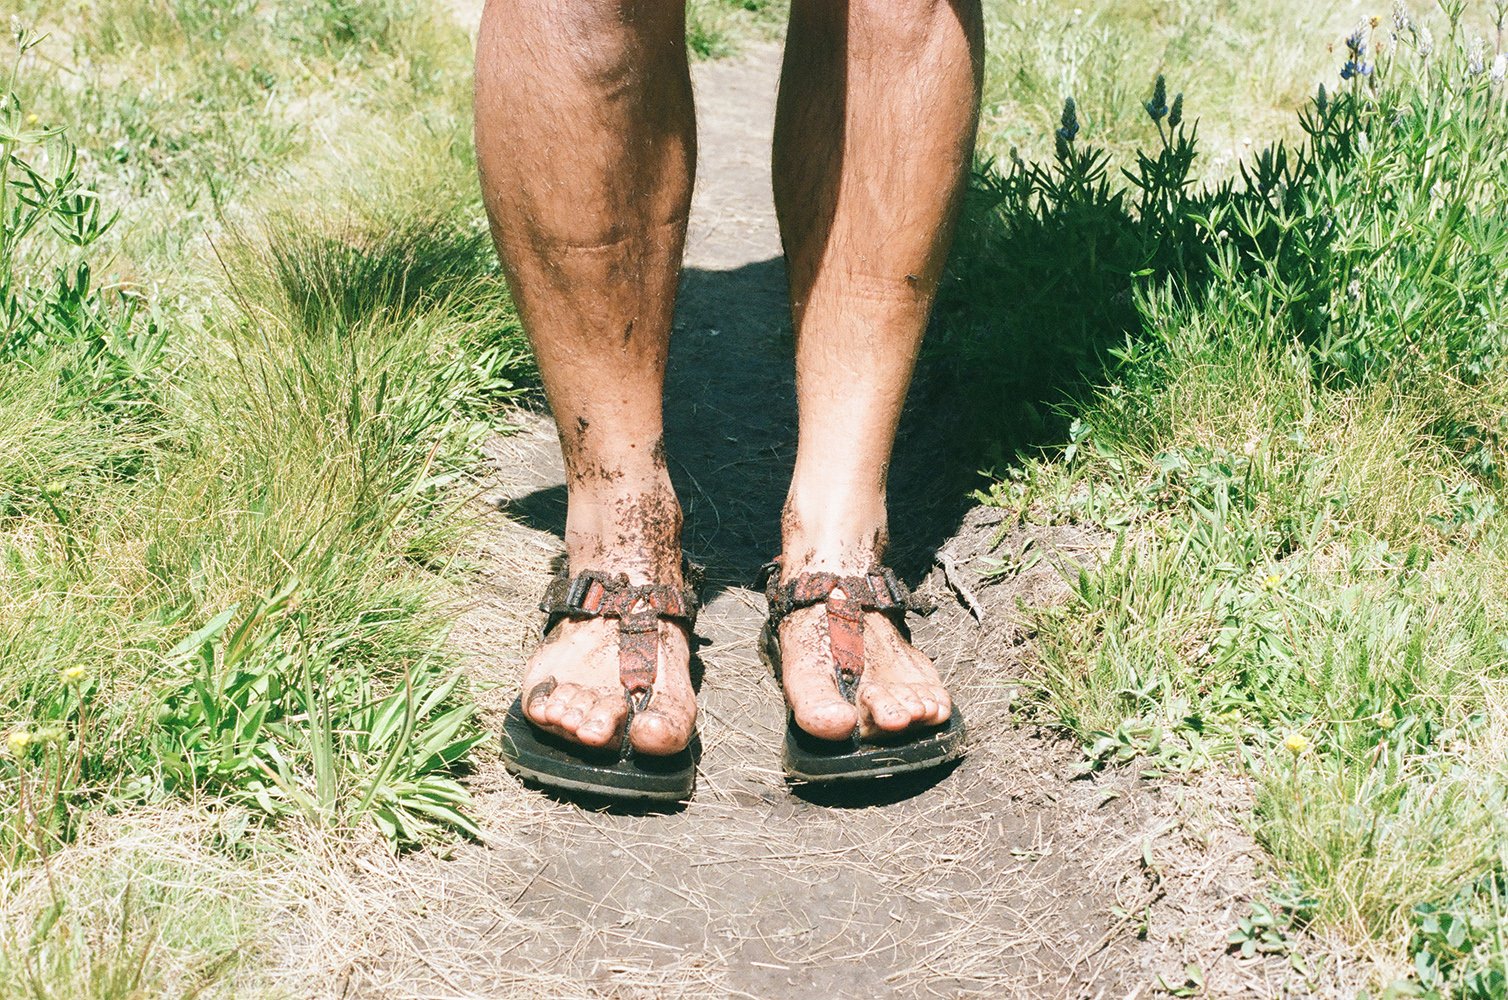  Owen’s feet after hiking through the meadow, 35mm film 